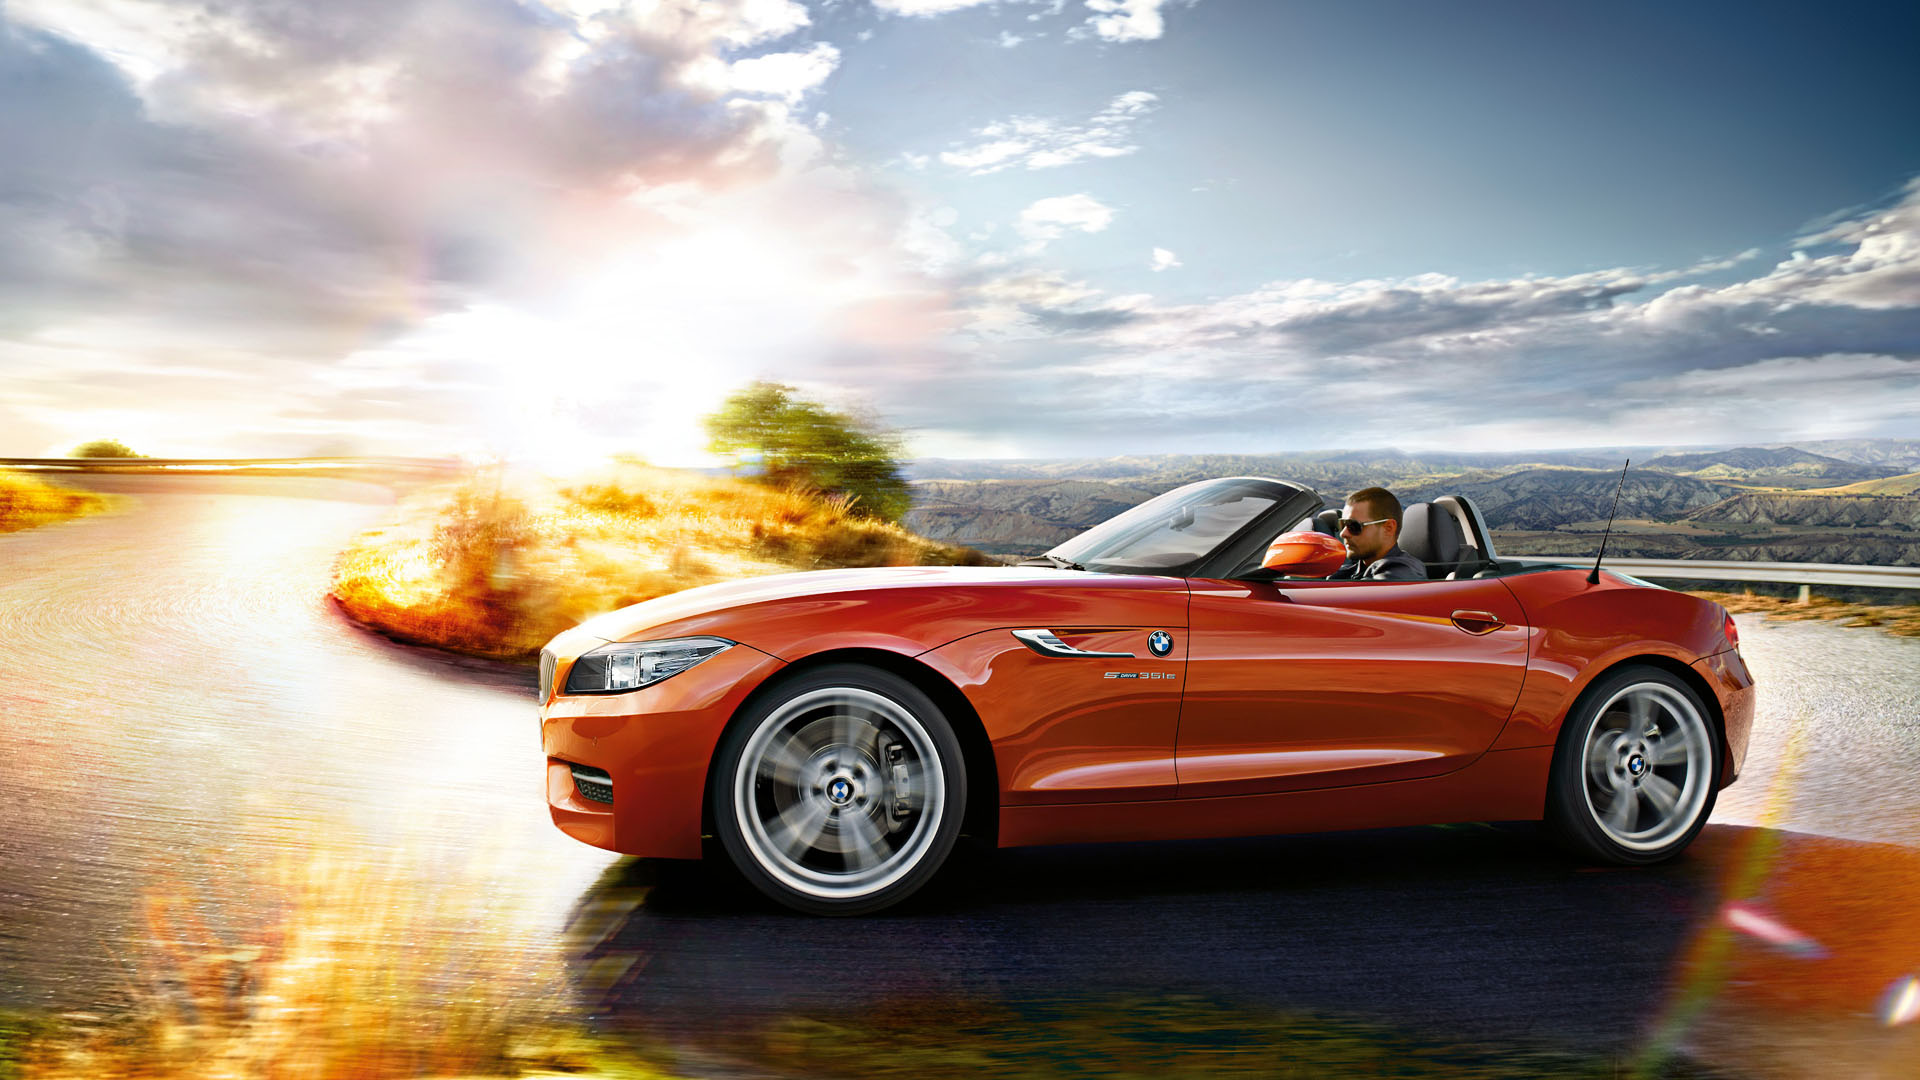 Free Download Bmw Z4 Wallpaper 1920x1080 For Your Desktop Mobile Tablet Explore 76 Z4 Wallpaper Z4 Wallpaper Xperia Z4 Wallpaper Bmw Z4 Wallpaper